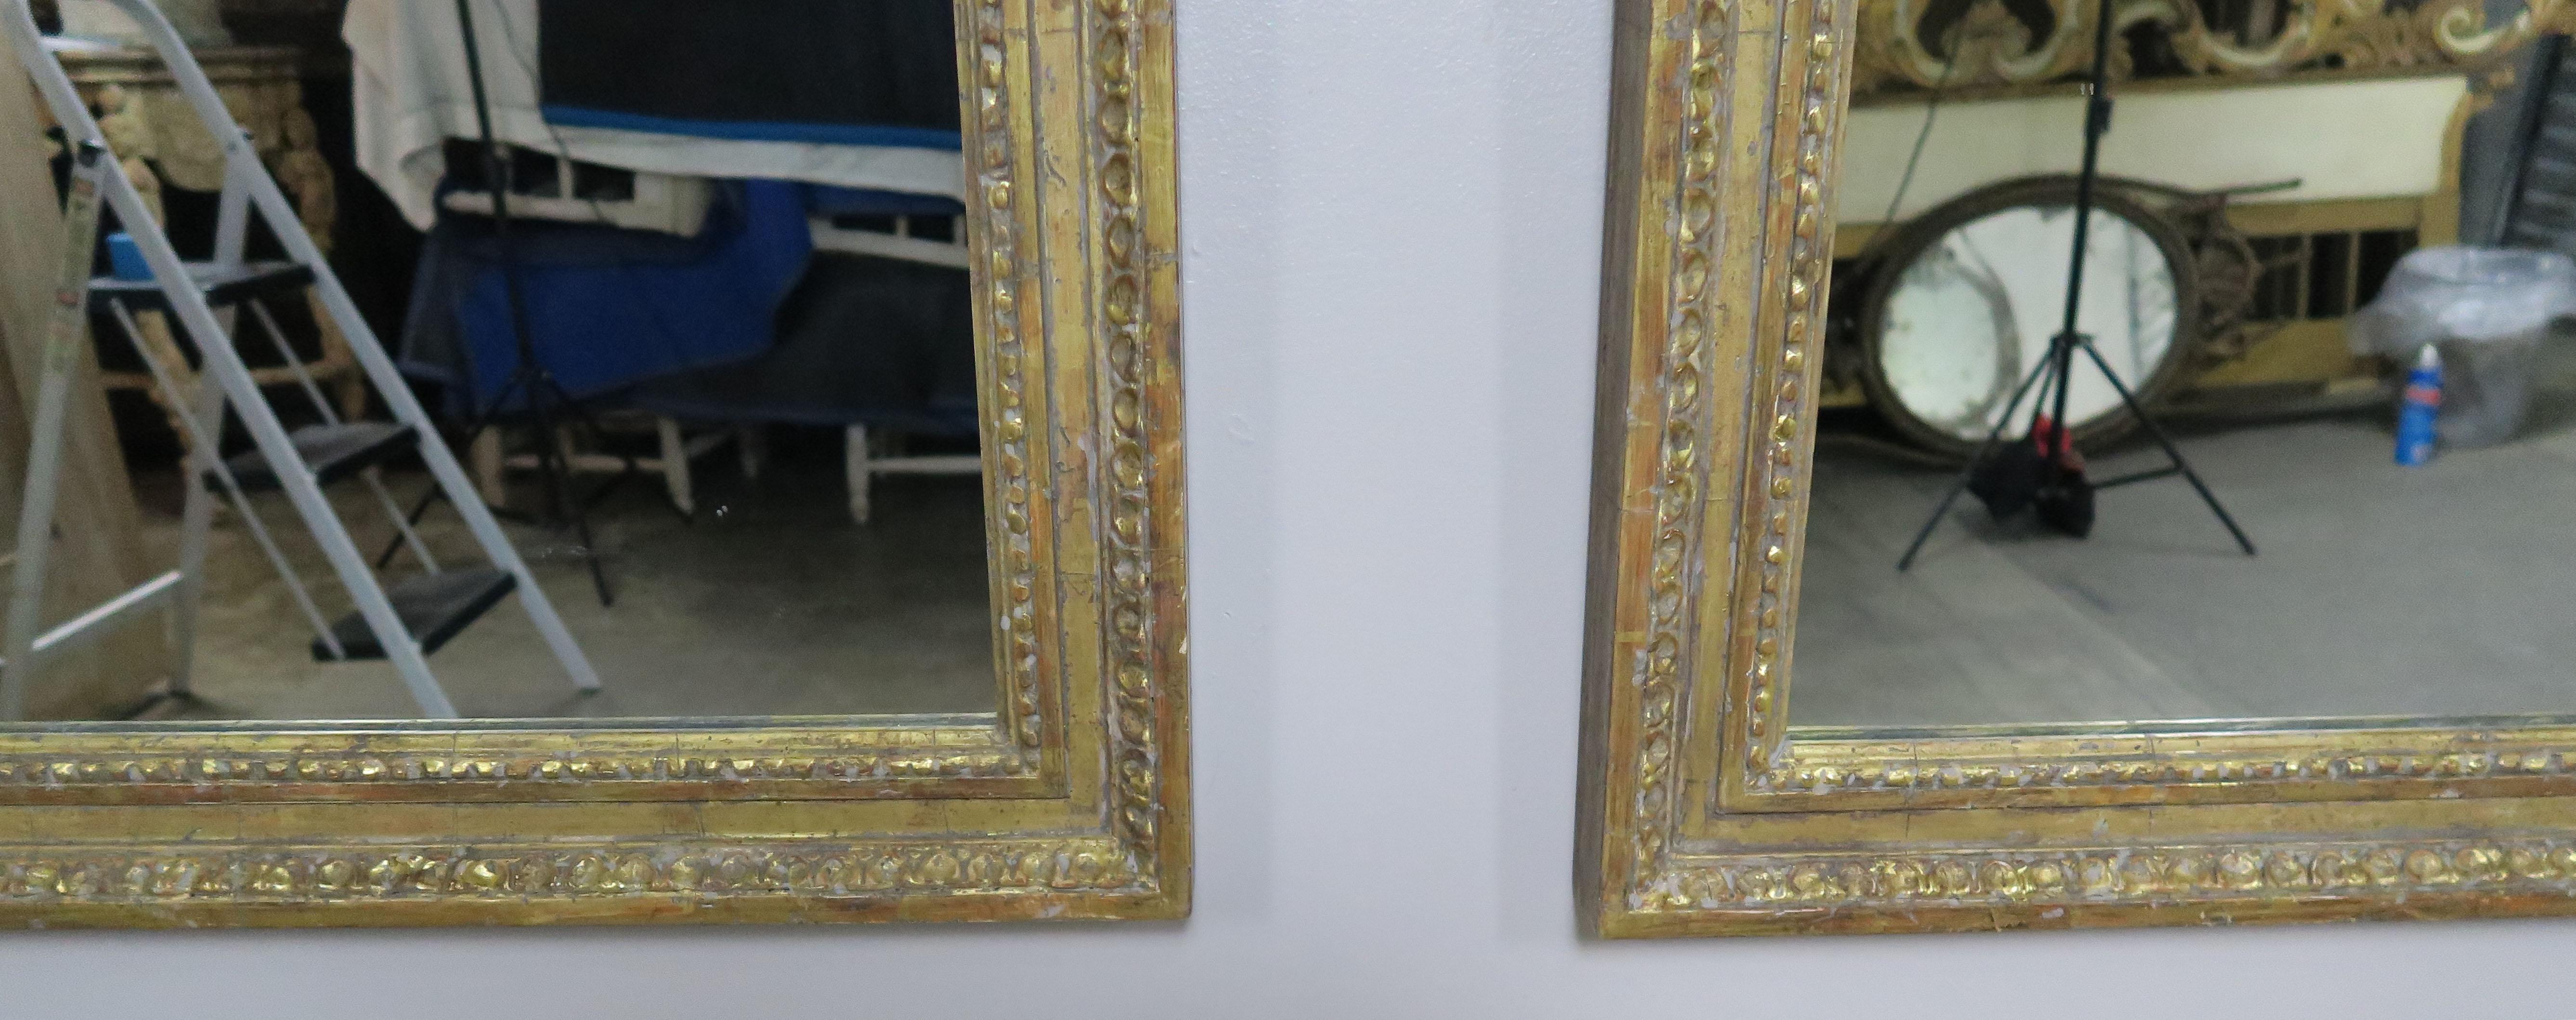 Gilt Pair of 22-Karat Gold Leaf Carved Mirrors by Melissa Levinson For Sale